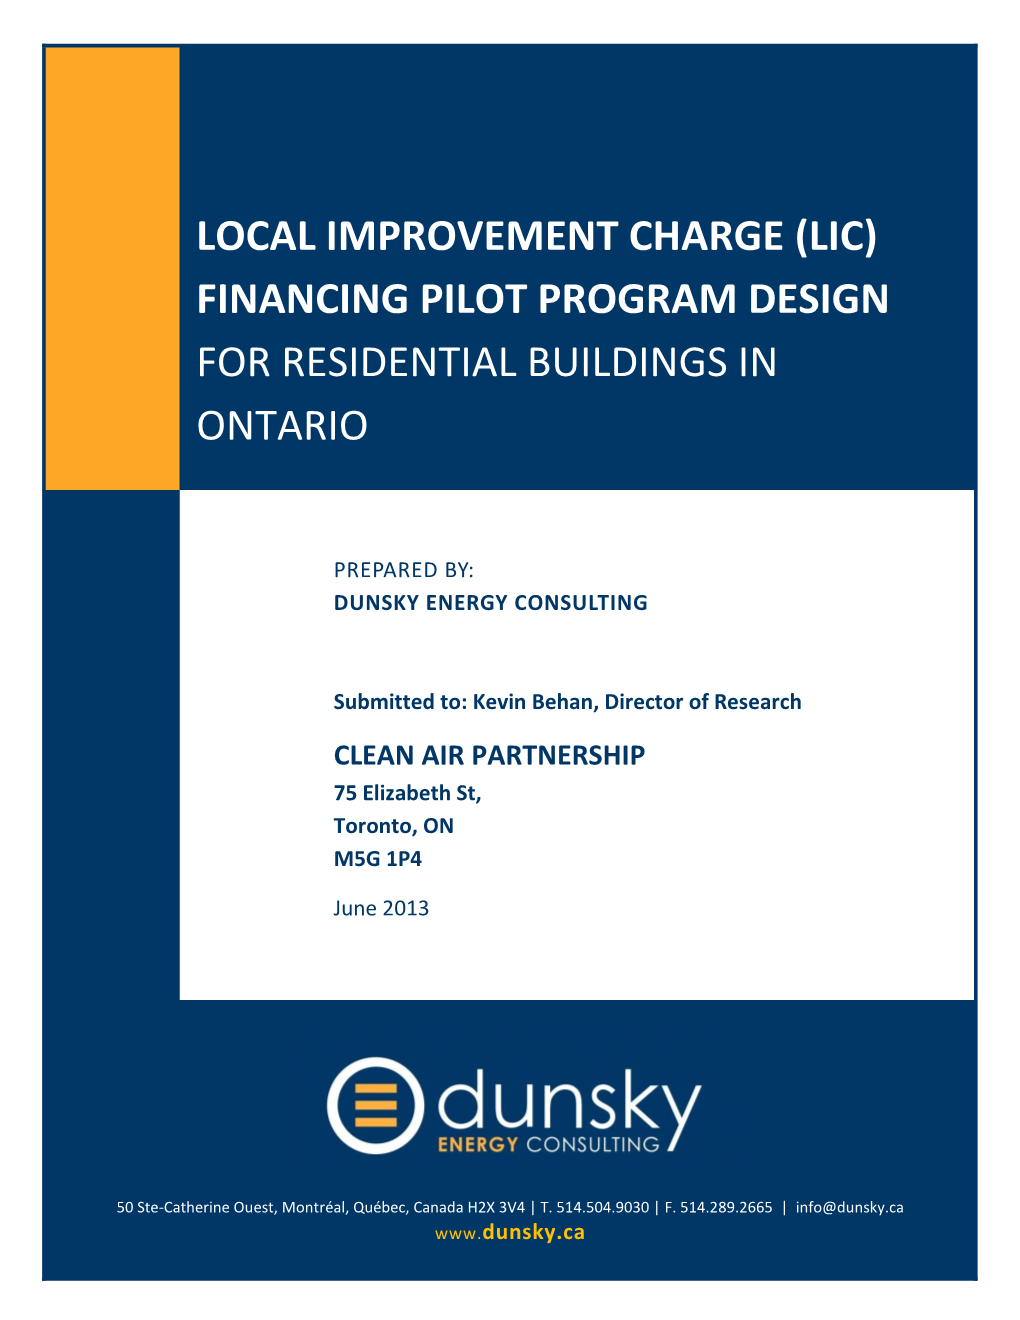 Local Improvement Charge (Lic) Financing Pilot Program Design for Residential Buildings in Ontario